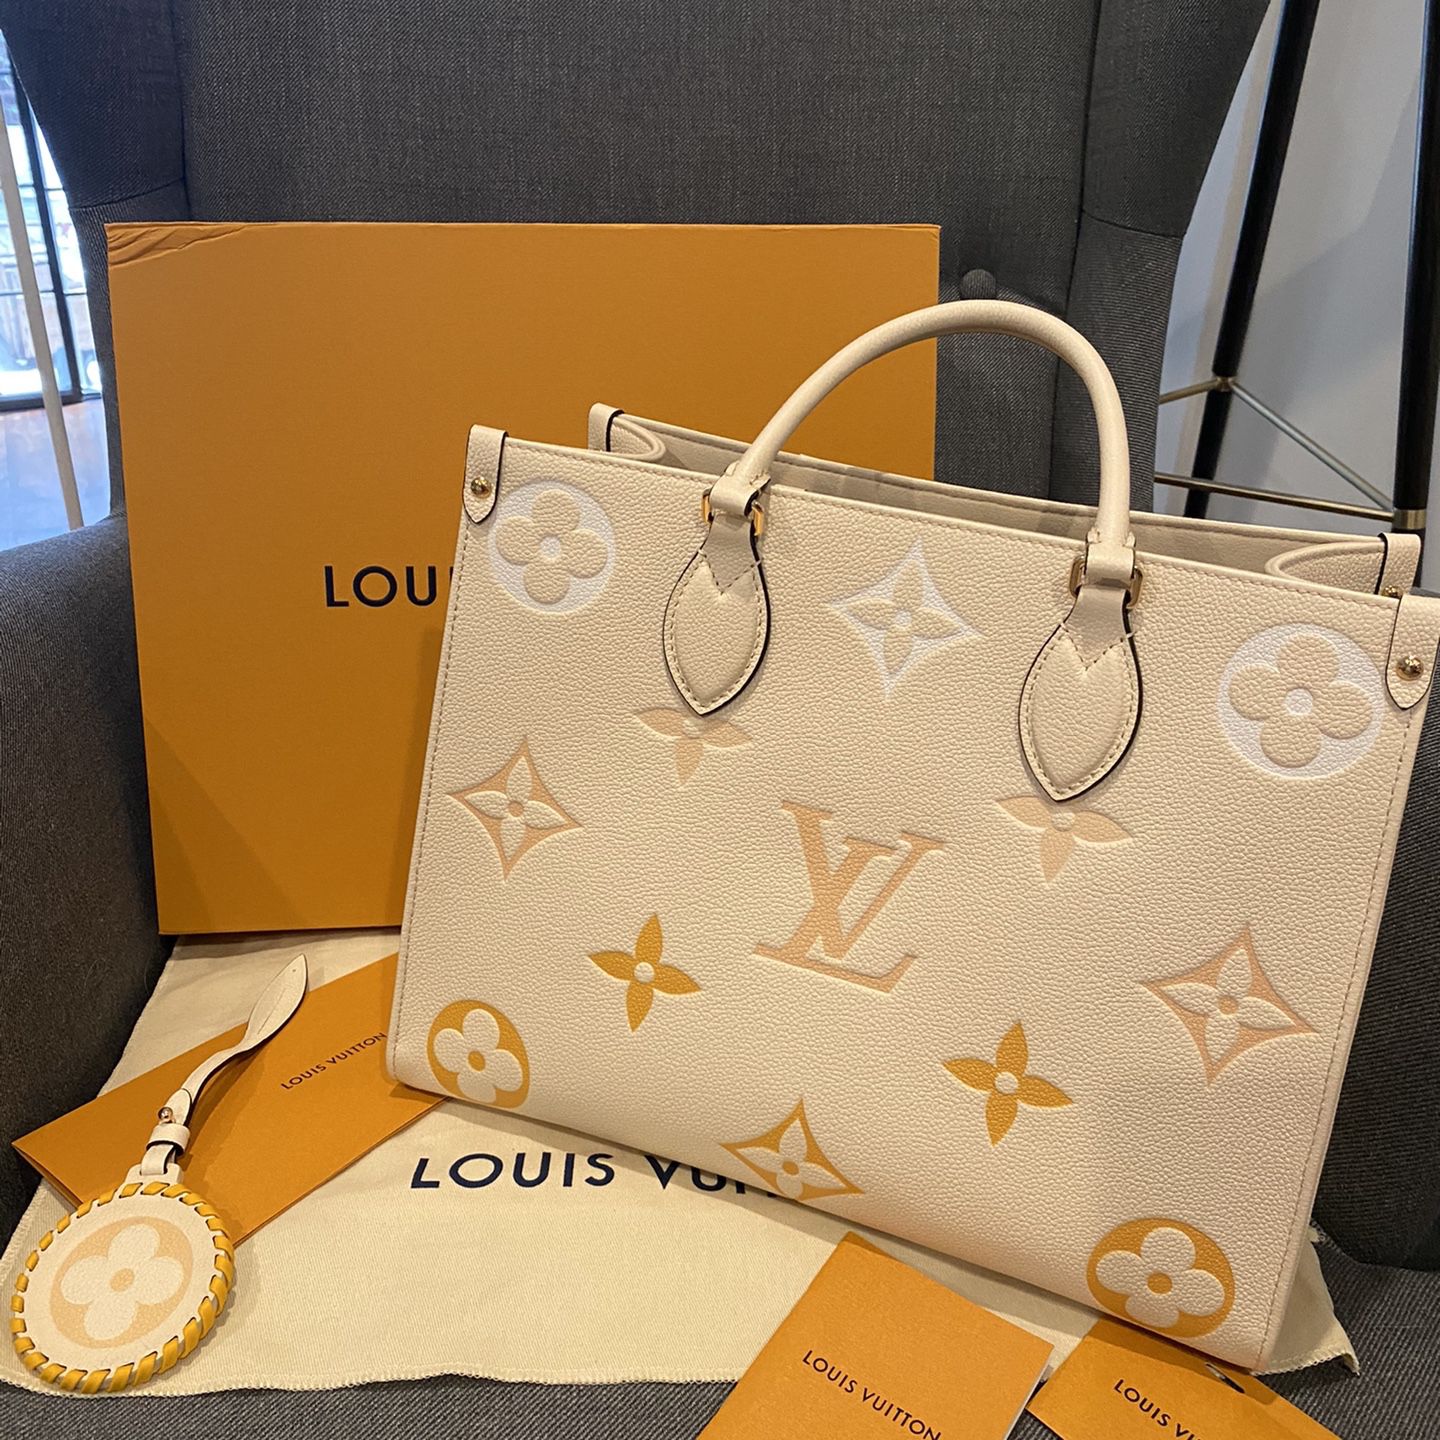 Louis Vuitton Keepall Prism Bag for Sale in Newport News, VA - OfferUp